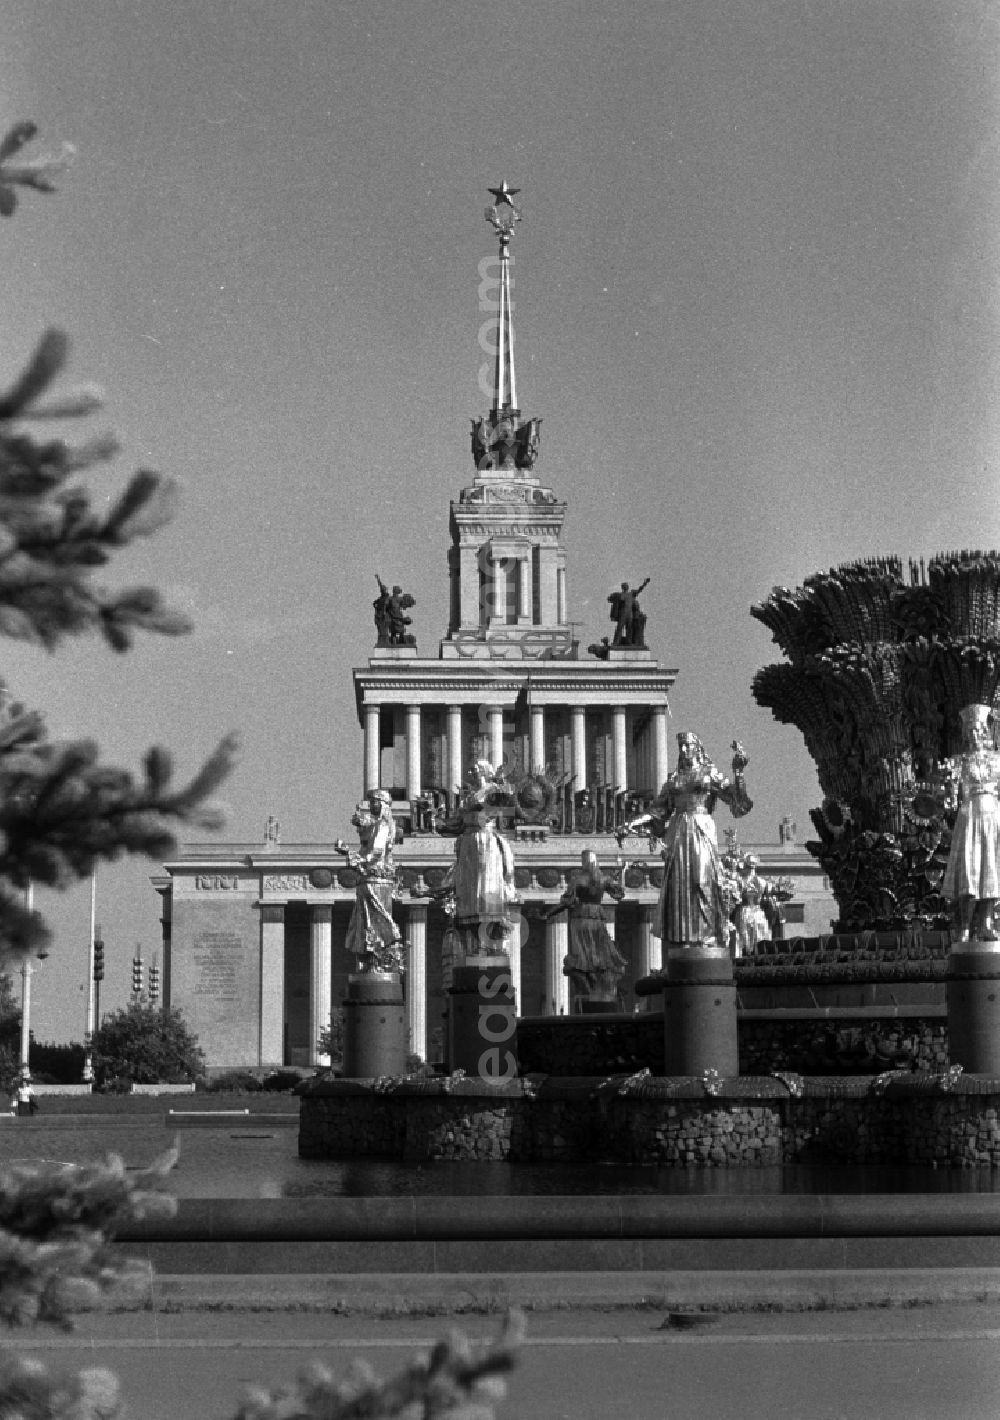 GDR picture archive: Moskau - The exhibition of achievements of national economy of the USSR (VDNKh) in Moscow. It was intended as a show of the achievements of socialism and was in the Soviet Union as a showpiece that demonstrated the power of the Soviet planned economy. In the foreground stands the Fountain of International Friendship. Behind the central pavilion